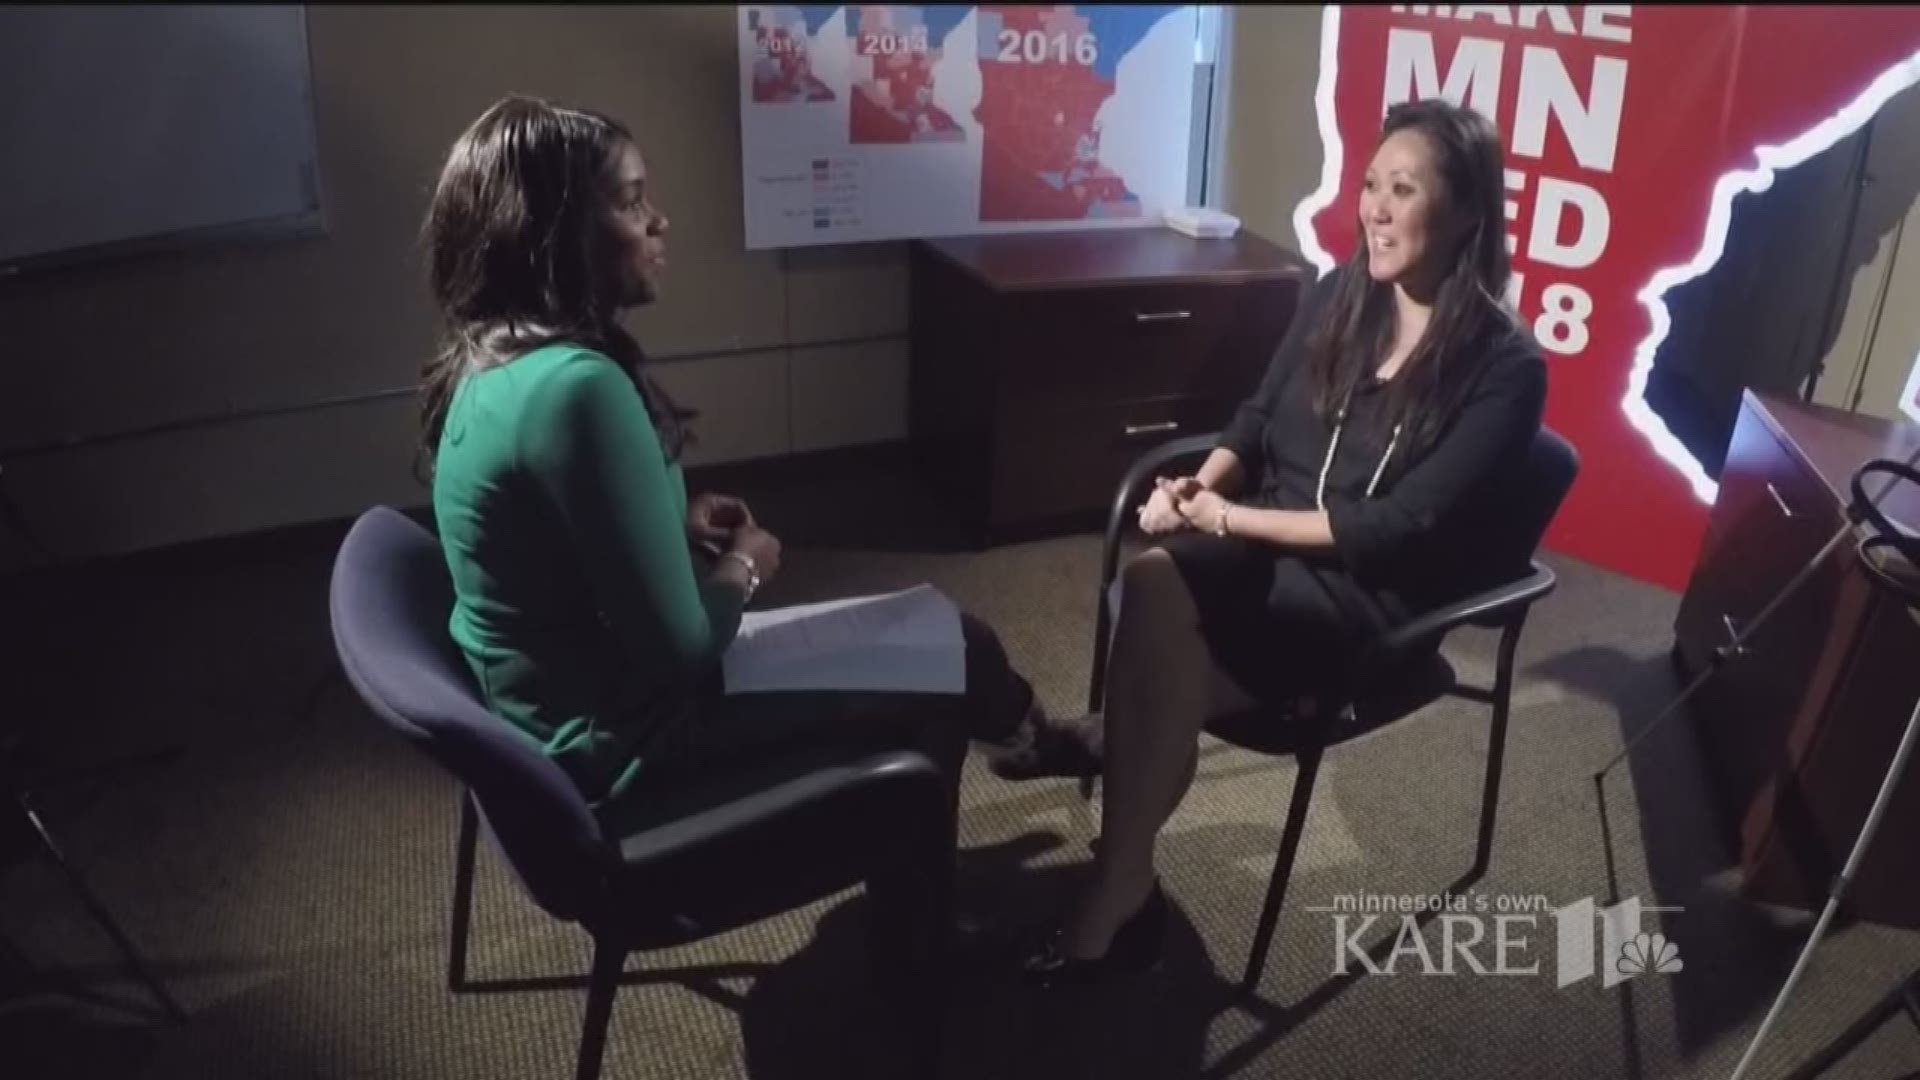 BTN11: Getting to Know the New MN GOP Chair - KARE